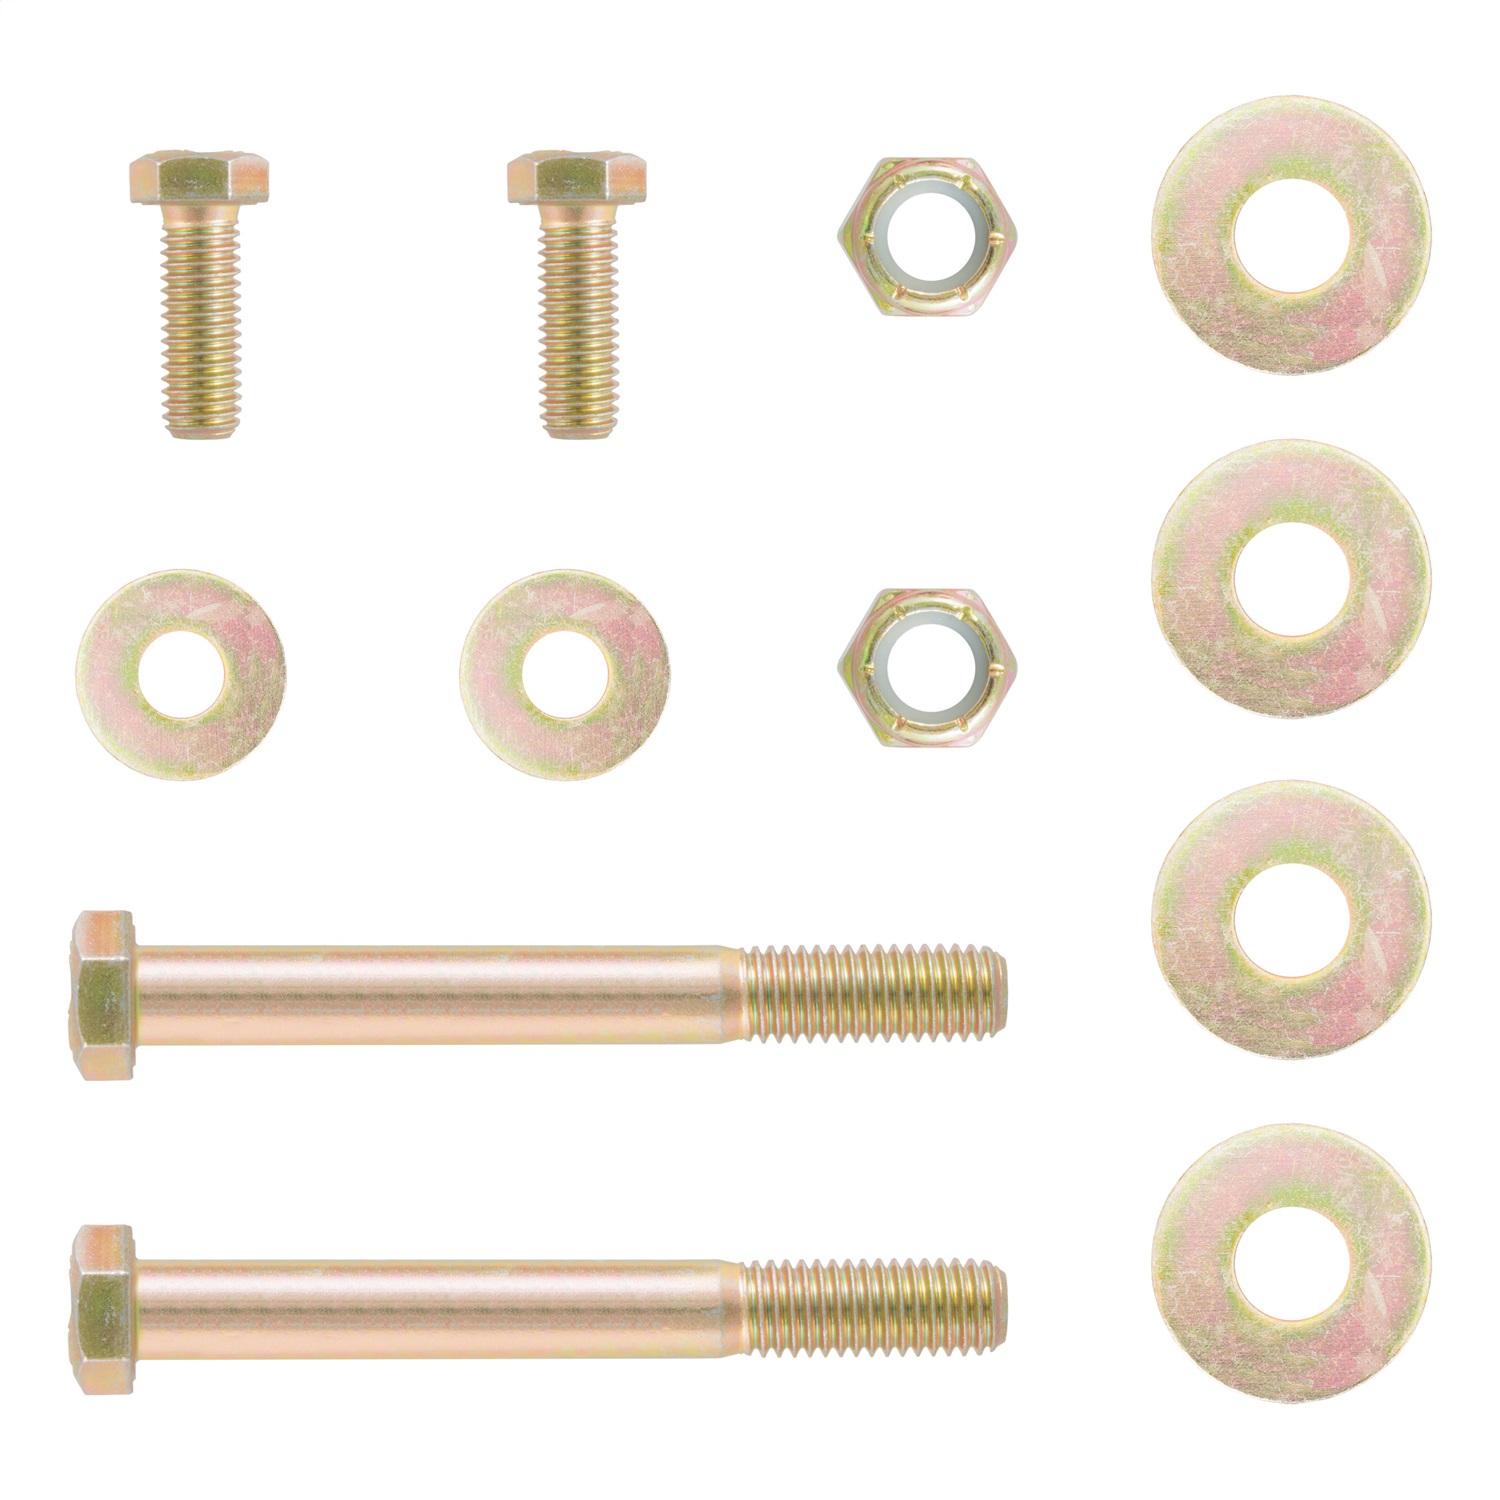 CURT Manufacturing CURT Manufacturing 48620 Adjustable Eye Nut And Bolt Kit  Fits